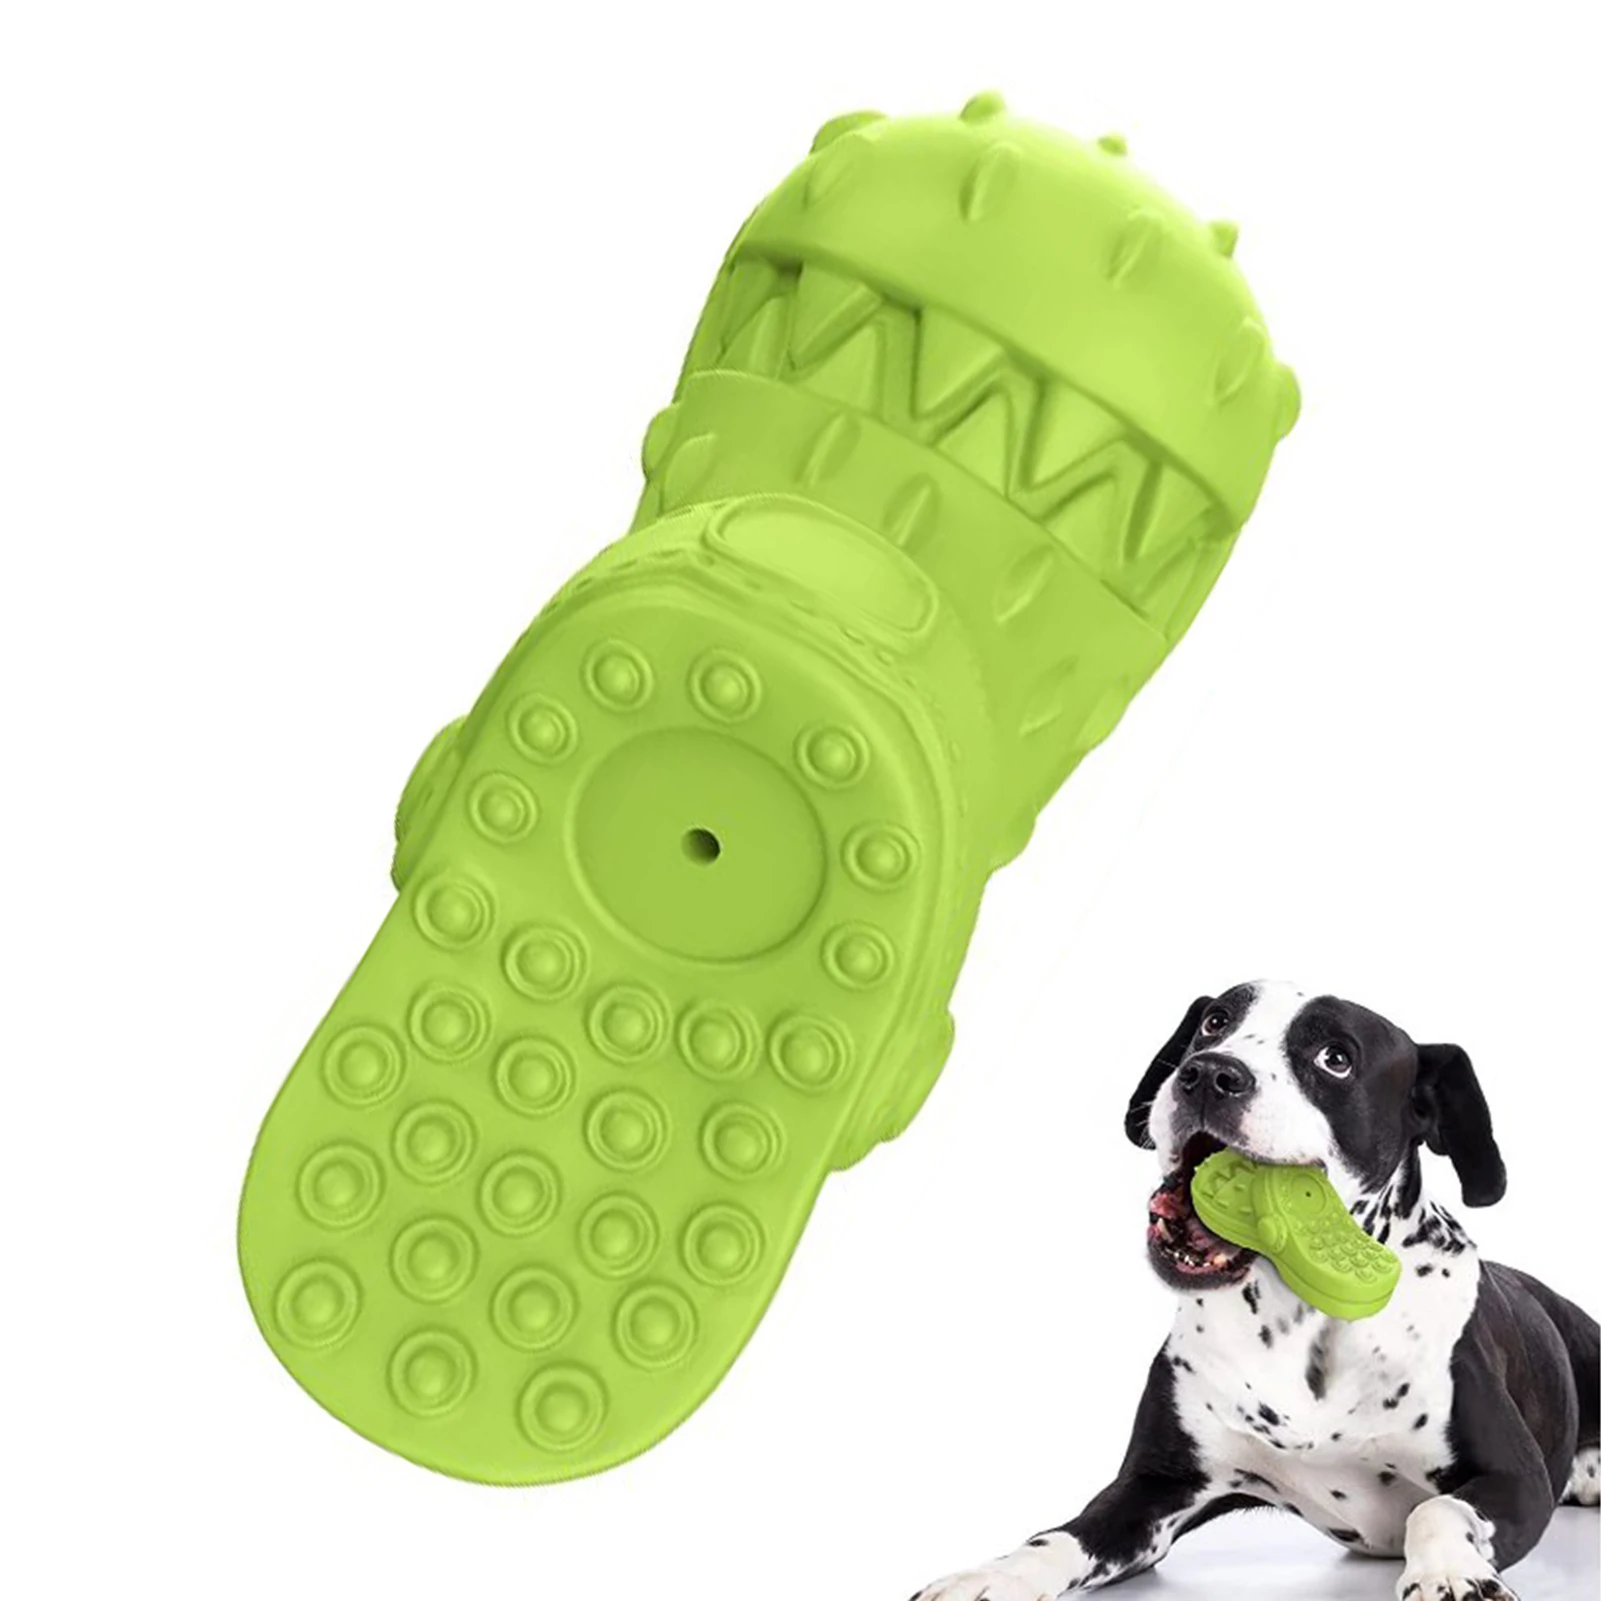 Rubber Dog Chew Toys Rubber Tough Dog Toys Innovative Slipper Shape Design Interactive Dog Toy For Large Medium Small Breed